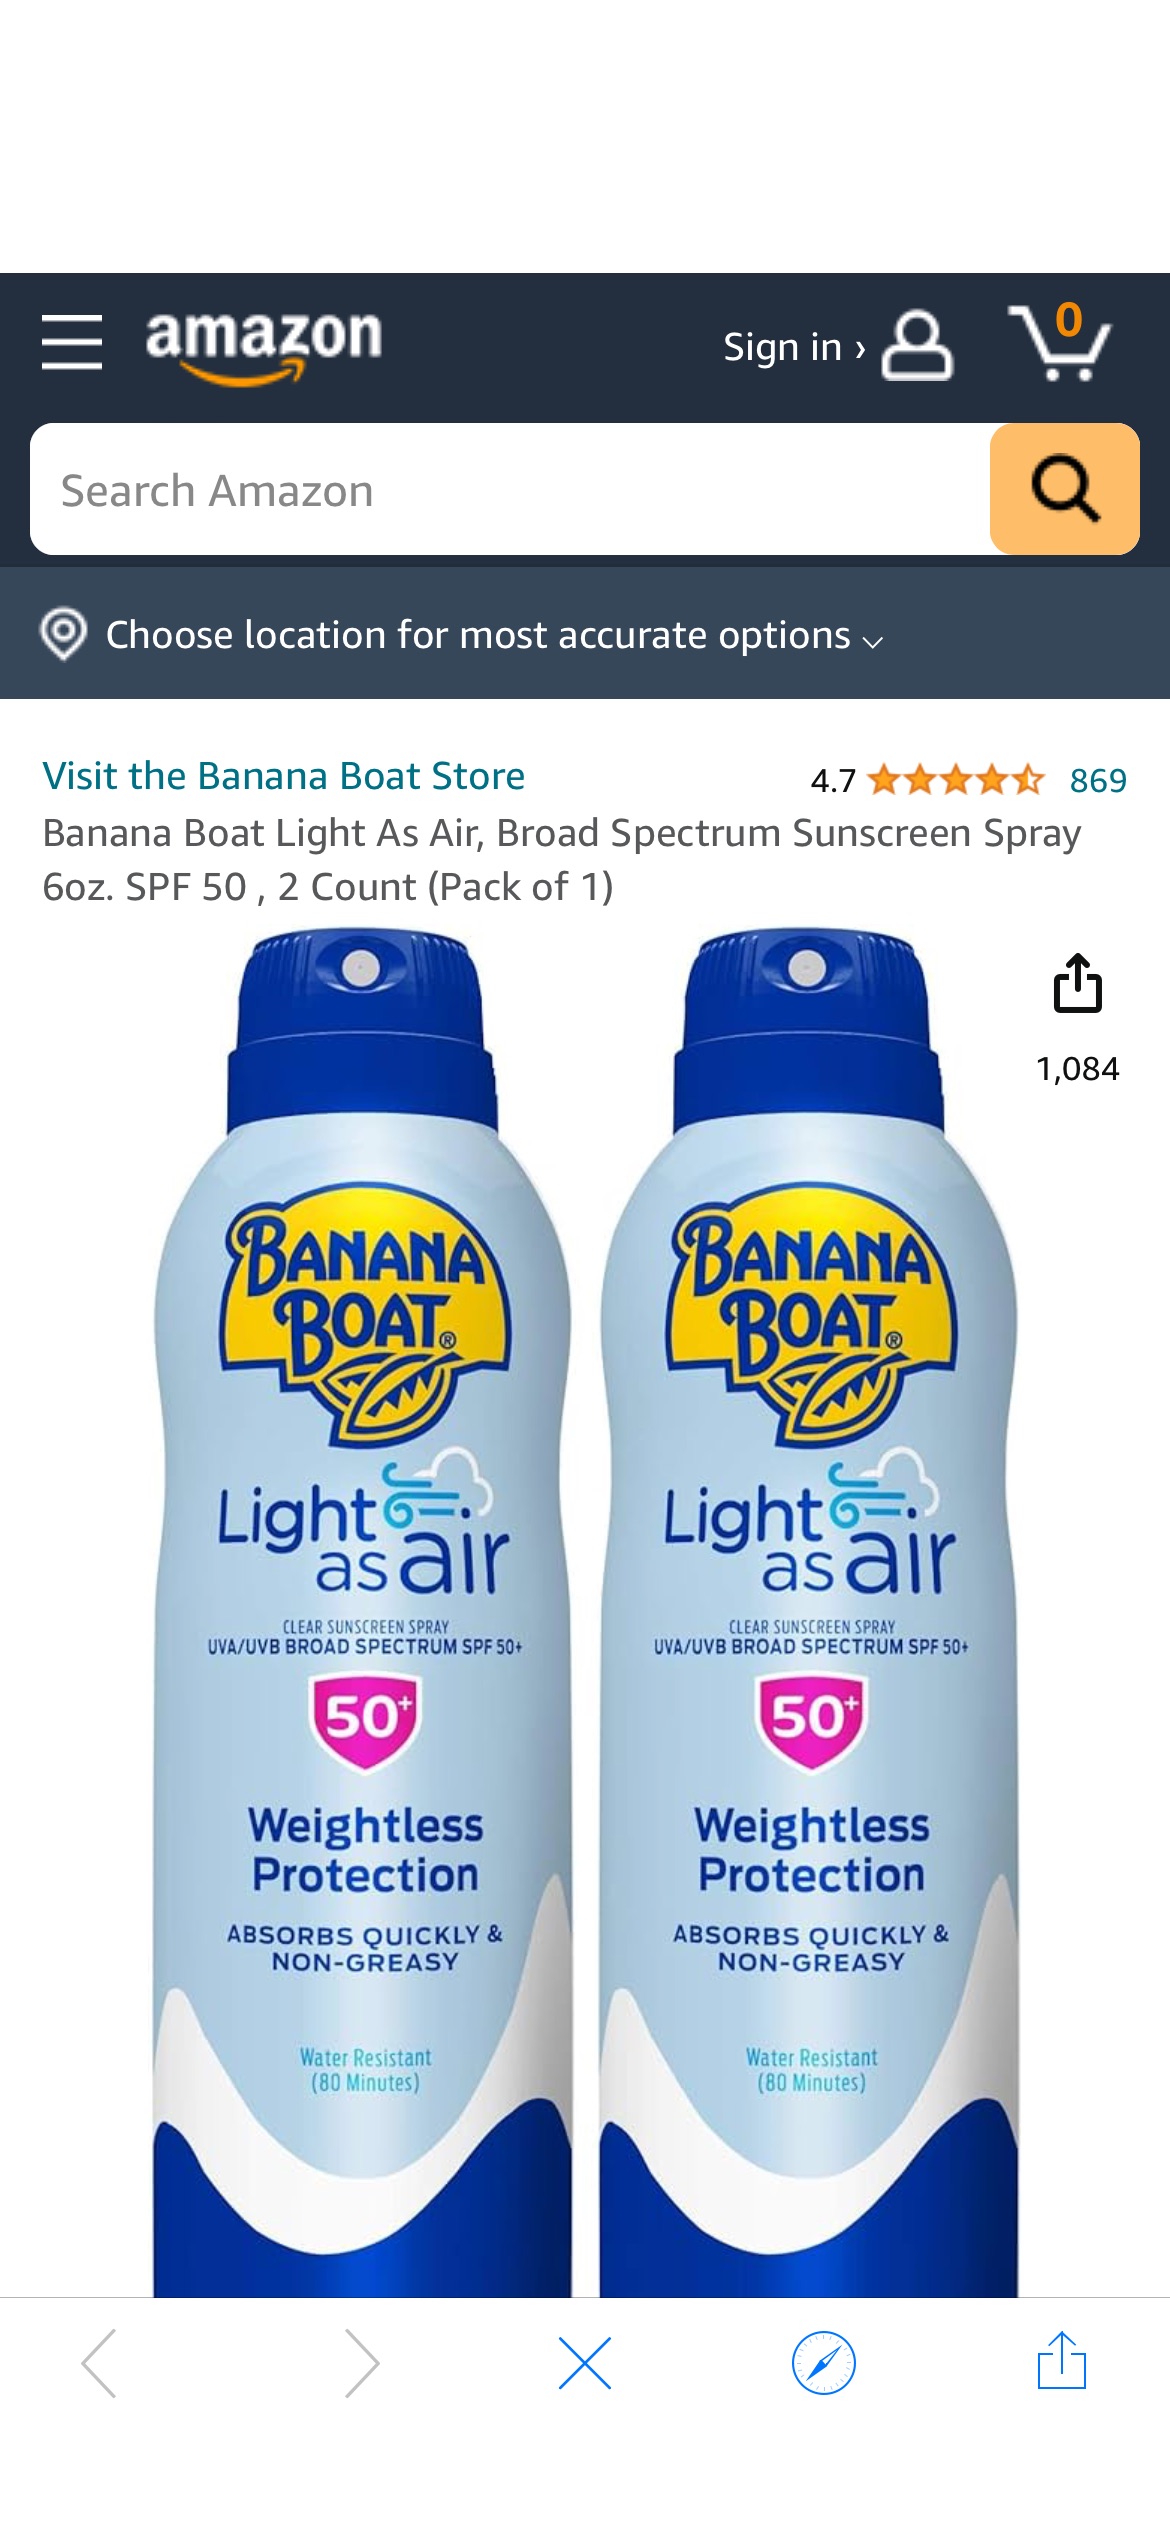 Amazon.com: Banana Boat Light As Air, Broad Spectrum Sunscreen Spray 6oz. SPF 50 , 2 Count (Pack of 1) : Beauty & Personal Care